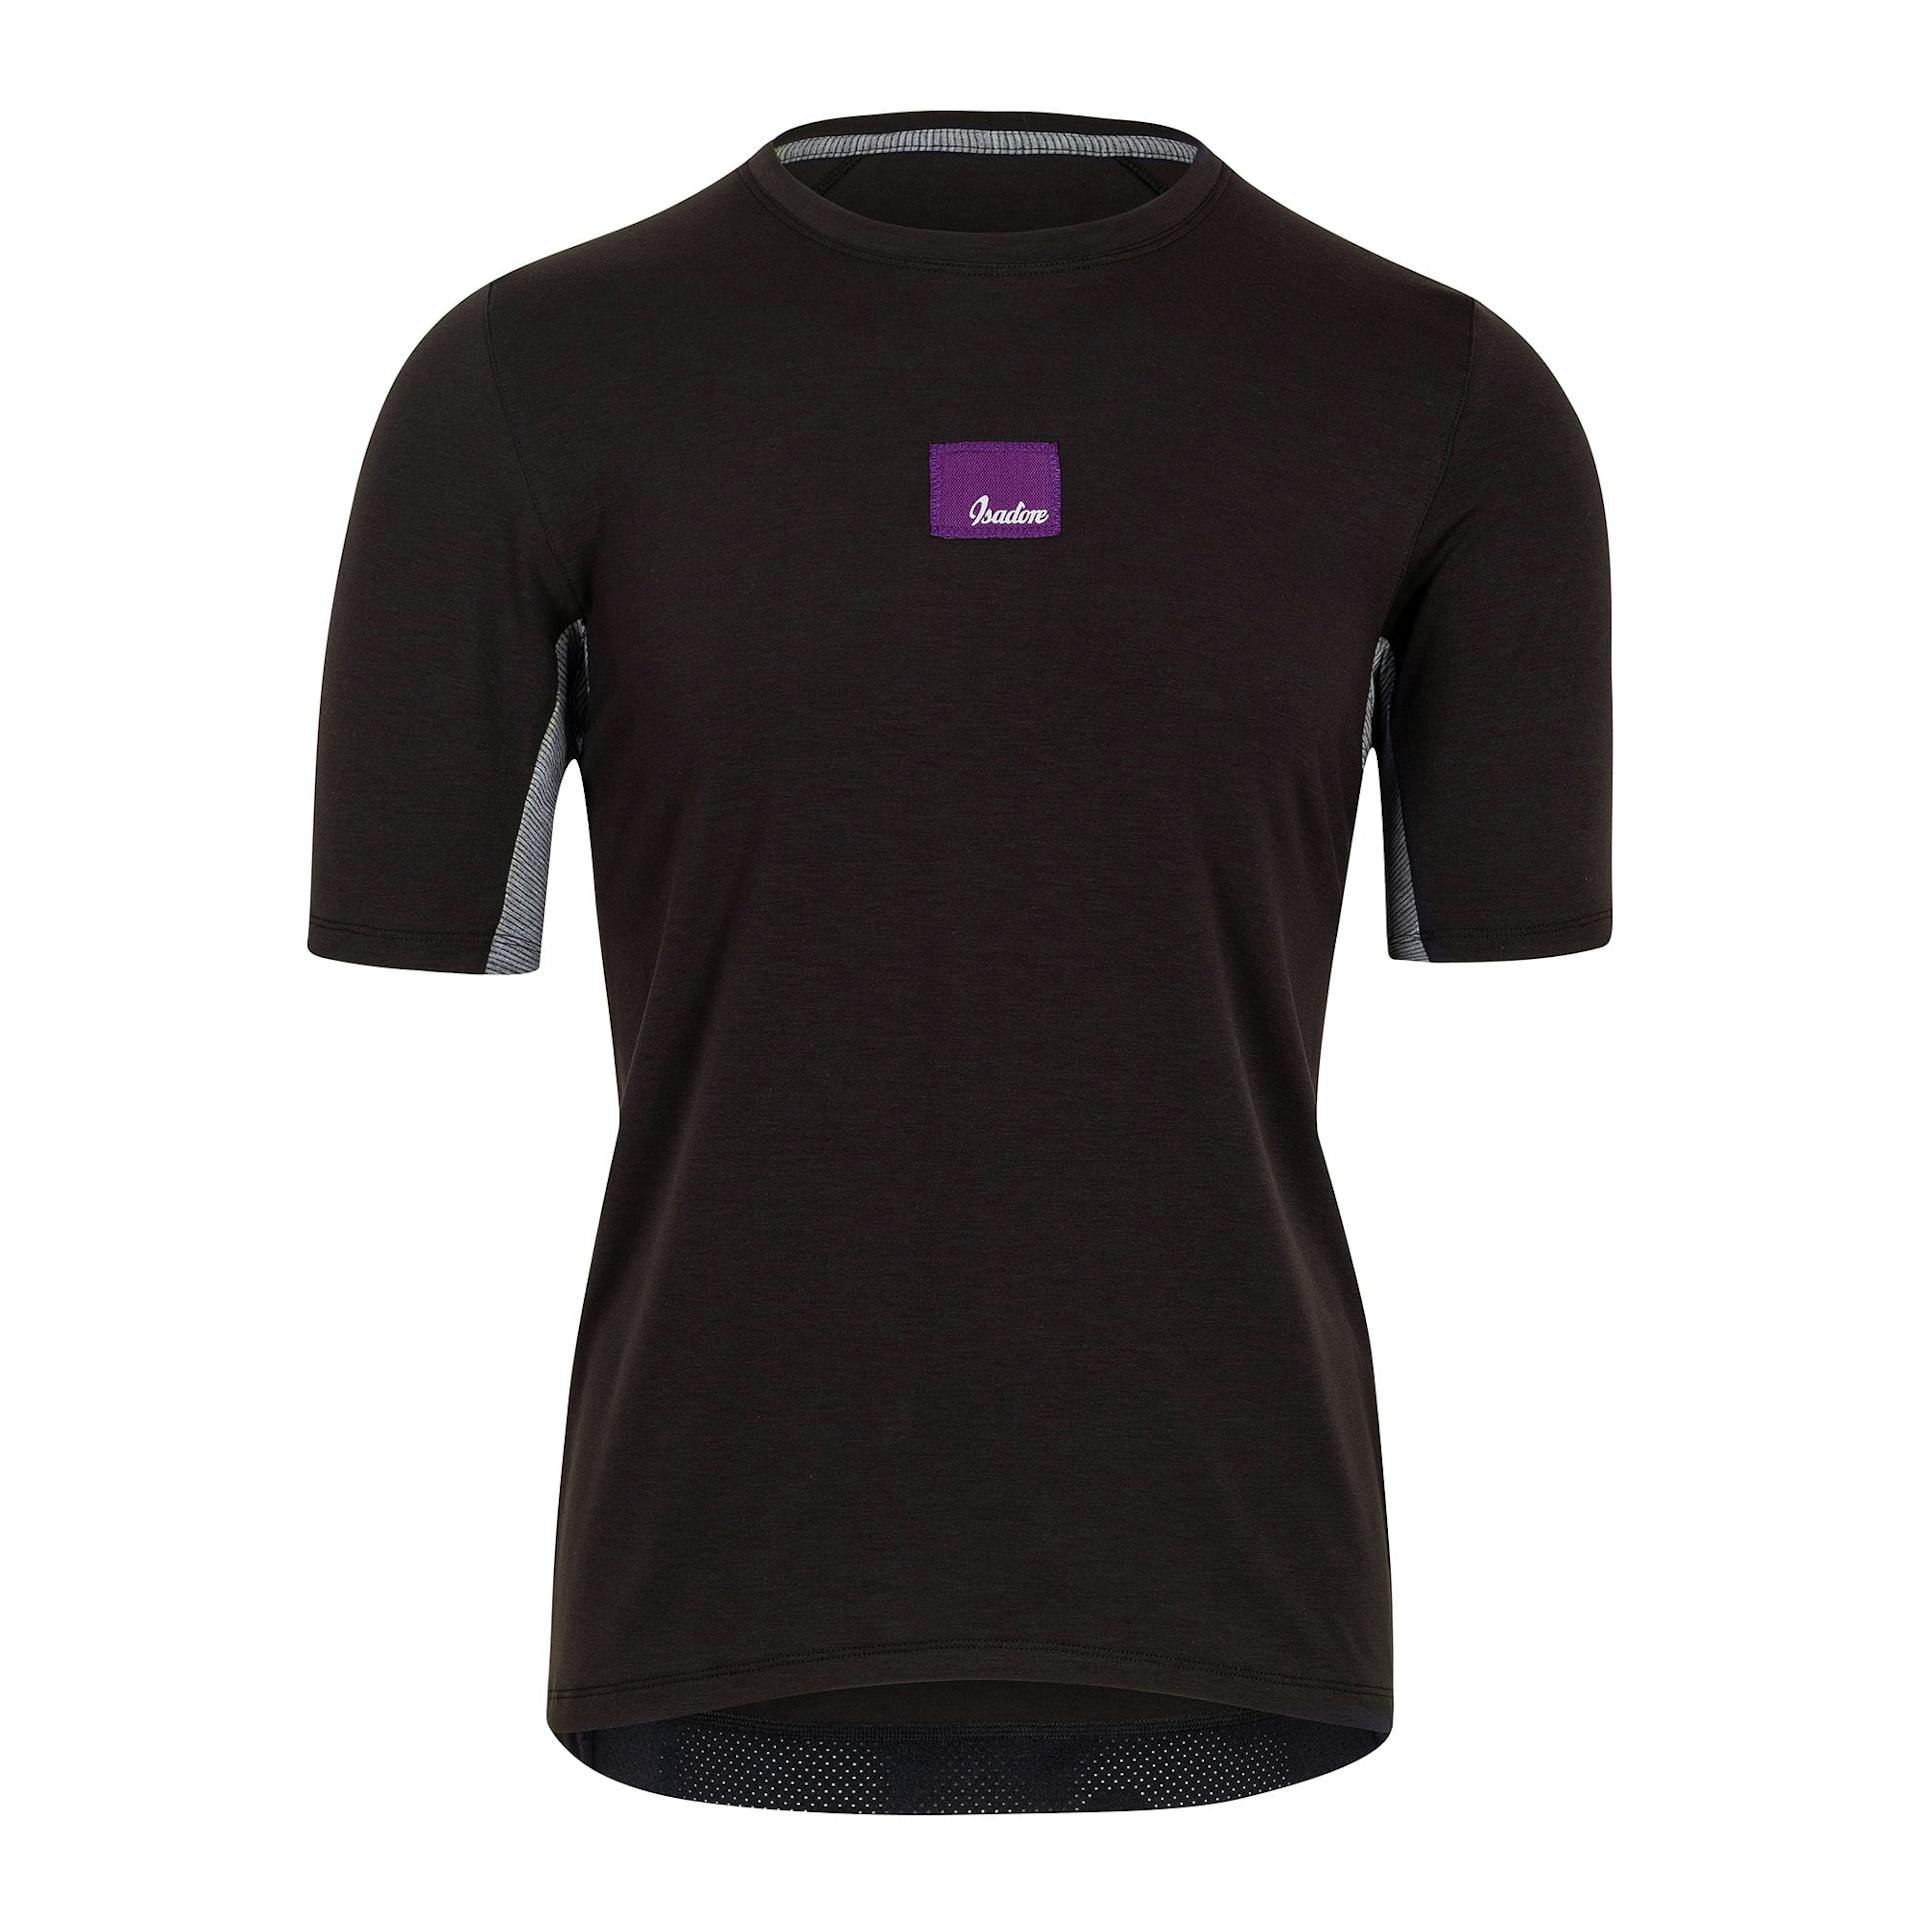 Off-road Tech T-Shirt - Anthracite
                        